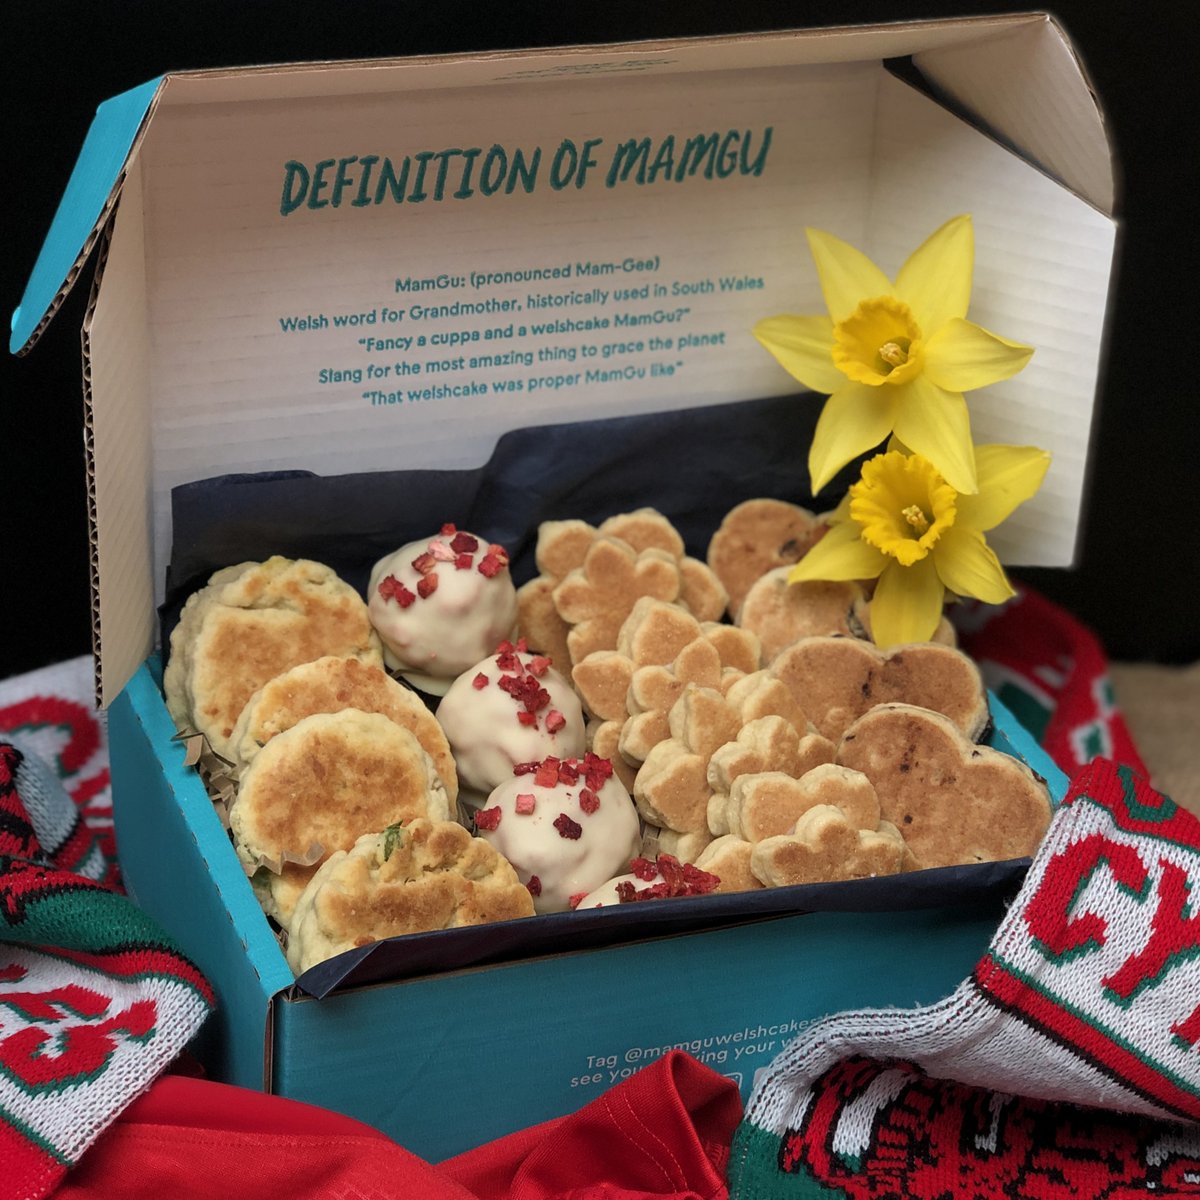 OUR ST DAVID’S DAY SPECIAL BOX IS NOW LIVE!! WAHOOO!!! 🤩🏴󠁧󠁢󠁷󠁬󠁳󠁿🙌🏼 March 1st is just around the corner, time for us to don our Welsh rugby shirts, pin a leek to our chest, sing Hen Wlad Fy Nhadau loud and proud and of course... EAT WEELSHCAAAAKES! 👇🏼👇🏼👇🏼 mamguwelshcakes.com/products/st-da…